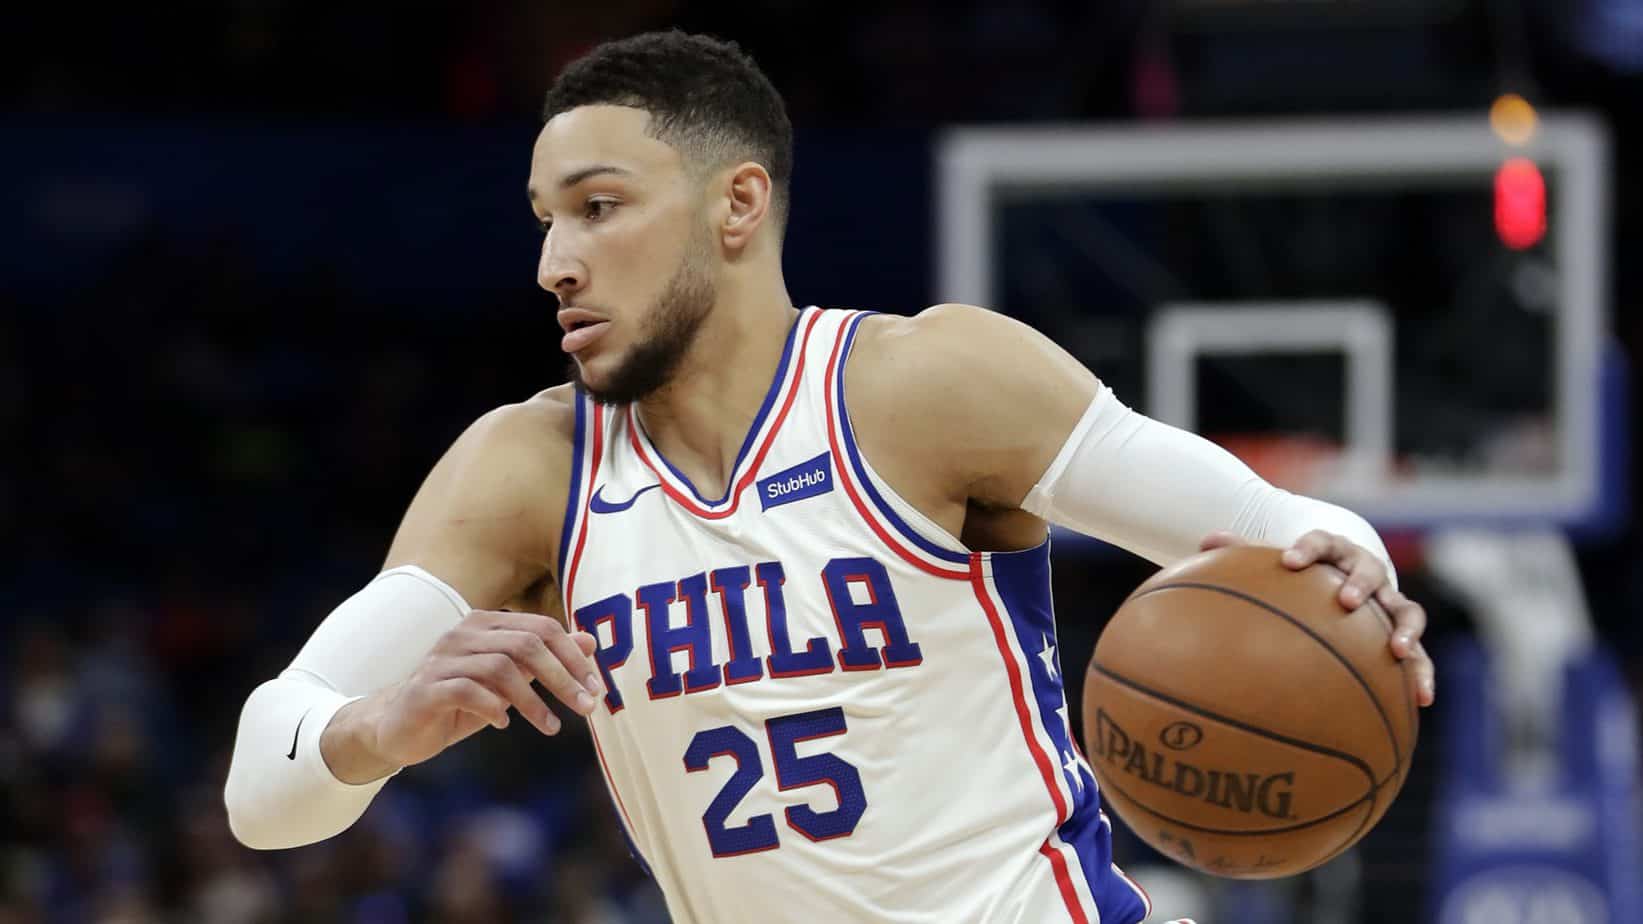 According to a report, the Philadelphia 76ers are still now here near a potential trade for star point guard Ben Simmons with the Trade Deadline looming